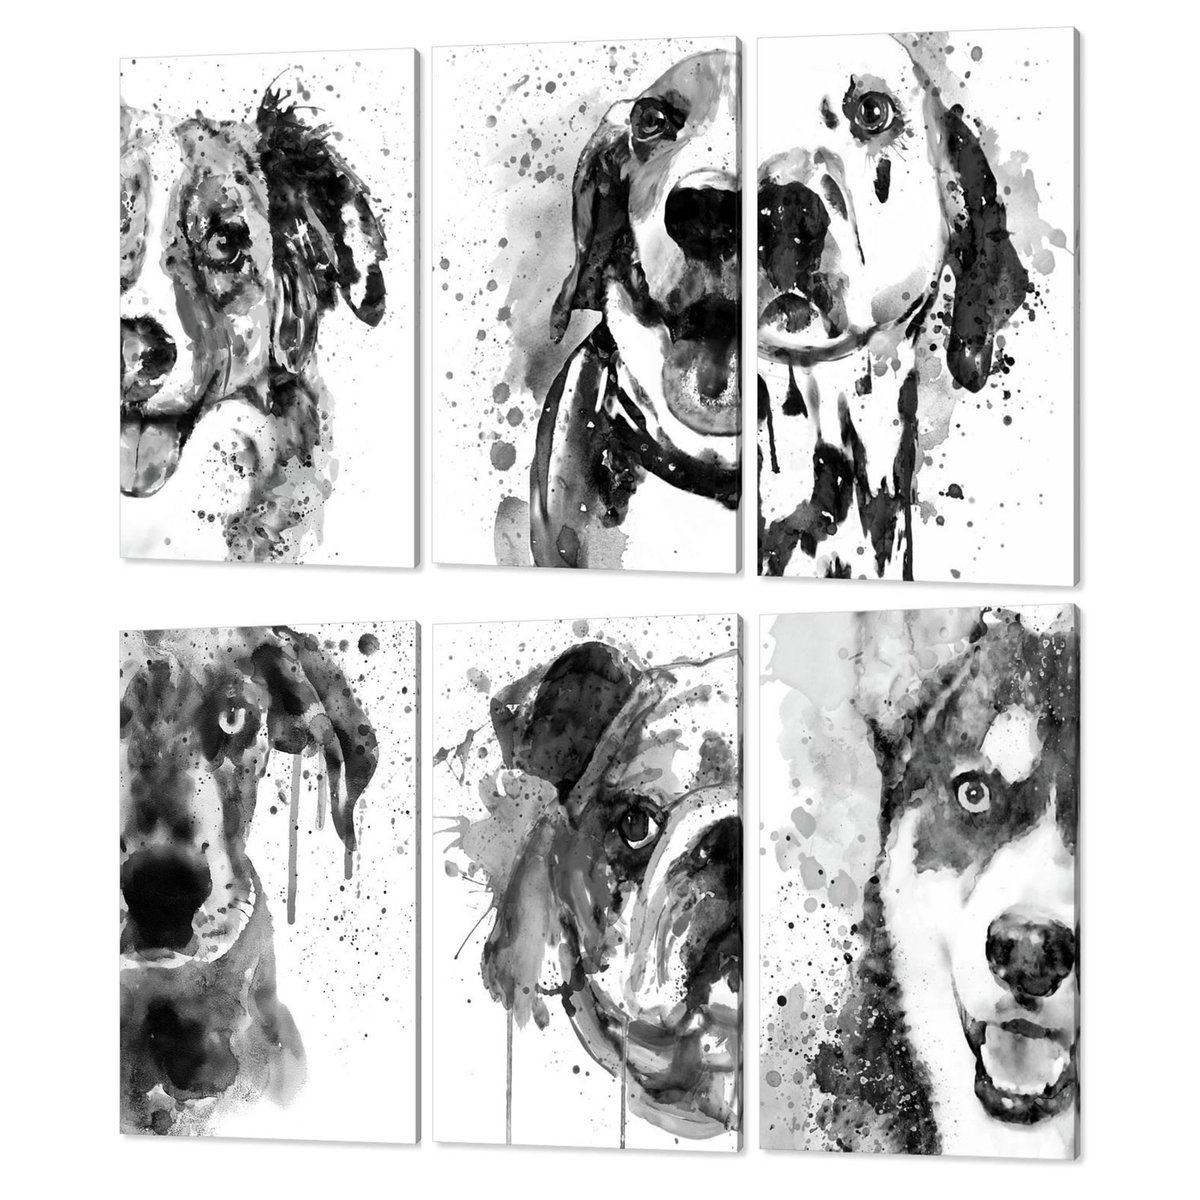 Many thanks to the buyer from Carlsbad, CA, who purchased six 24' x 36' canvas prints of various black and white half-faced dogs! 
fineartamerica.com/profiles/maria…
#dogs #blackandwhite #halfface #watercolorpainting #dogportrait #pets #canvasprint #wallart #artforsale #animalart #doglover